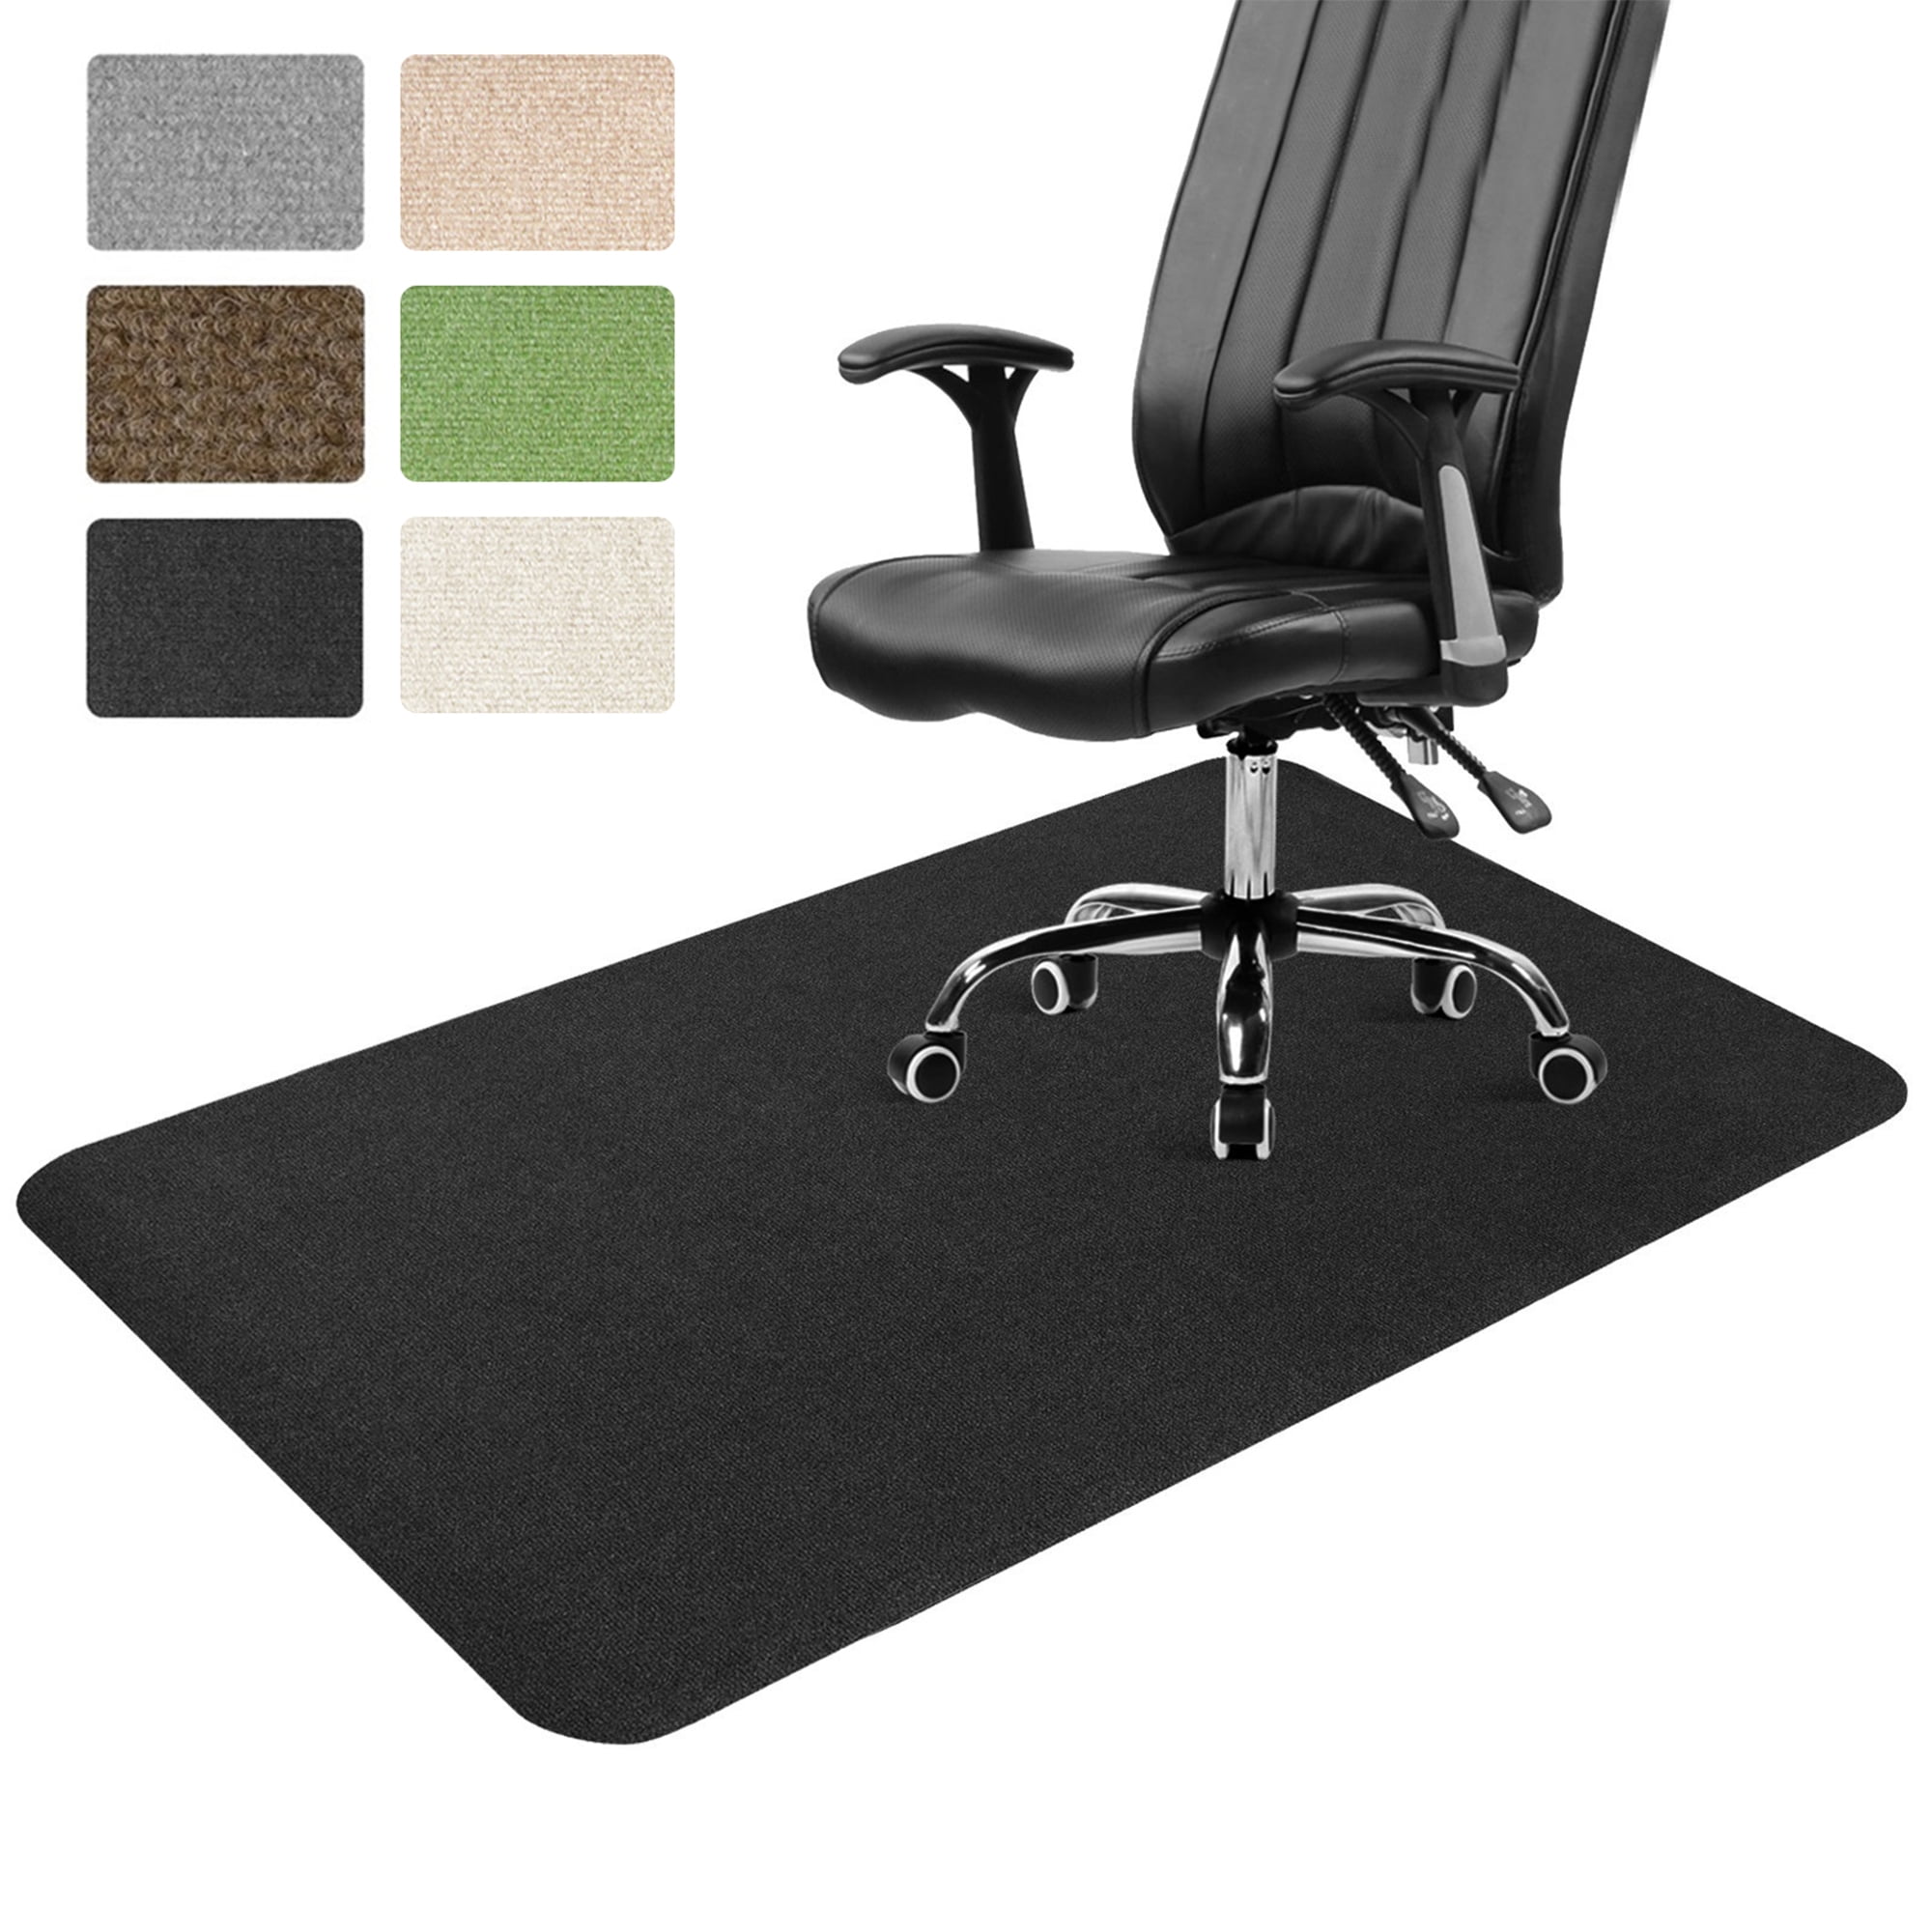 Freelung Office Chair Mat for Hard Wood Floors 48 inchx30 inch in Heavy Duty Floor Protector Clear Mat, Size: 48 x 30